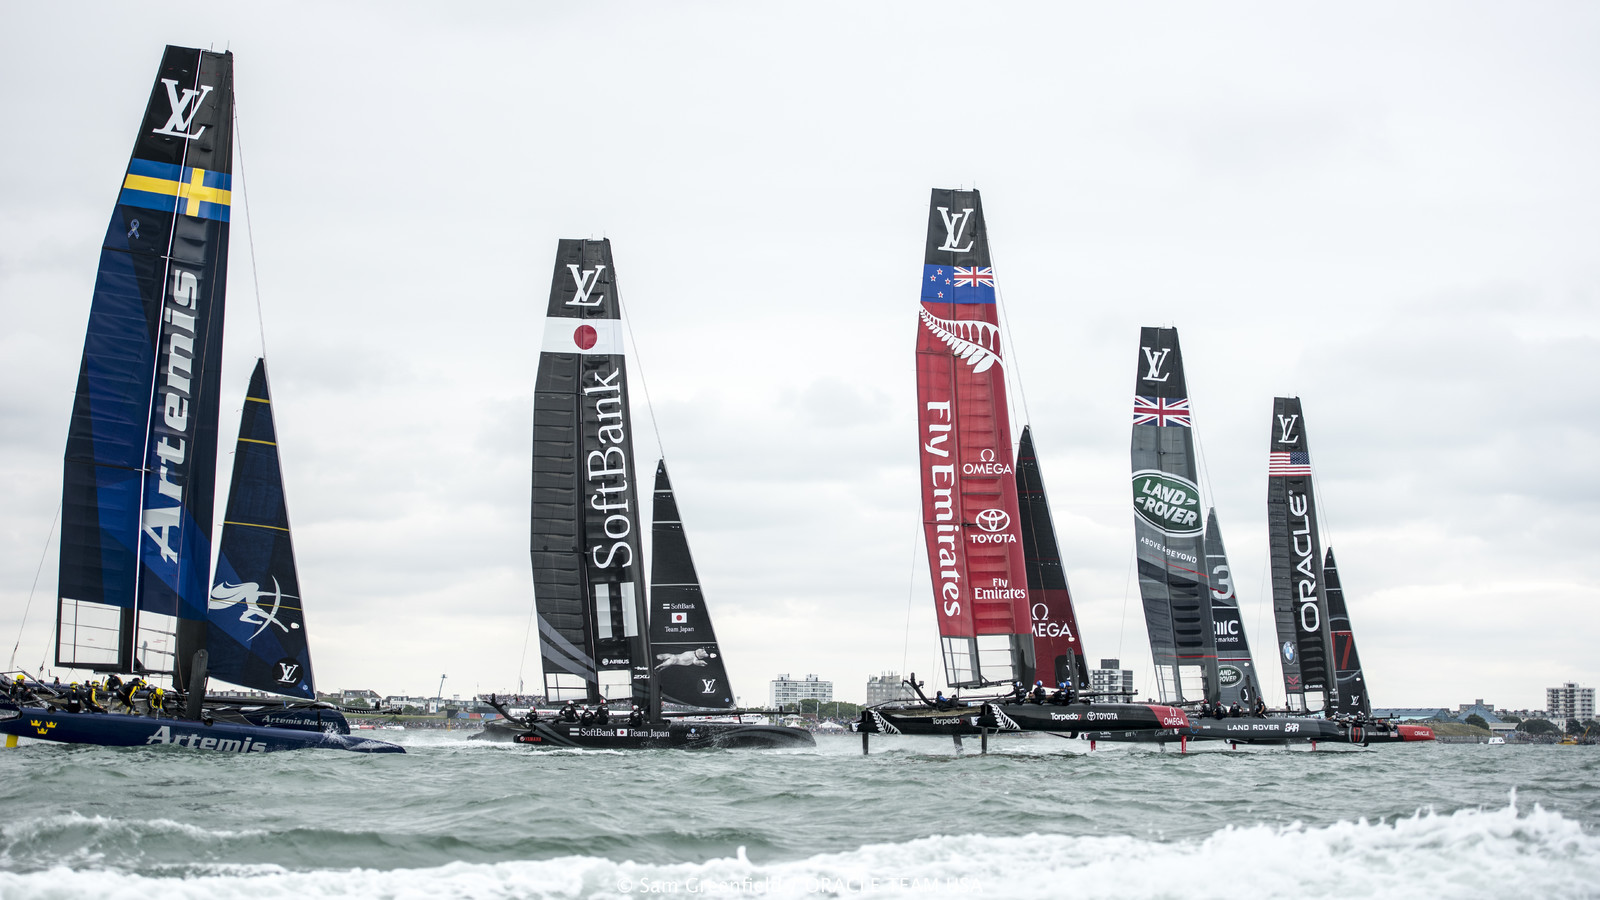 Louis Vuitton America's Cup World Series Portsmouth on 21 July 2016 in  Portsmouth, England.